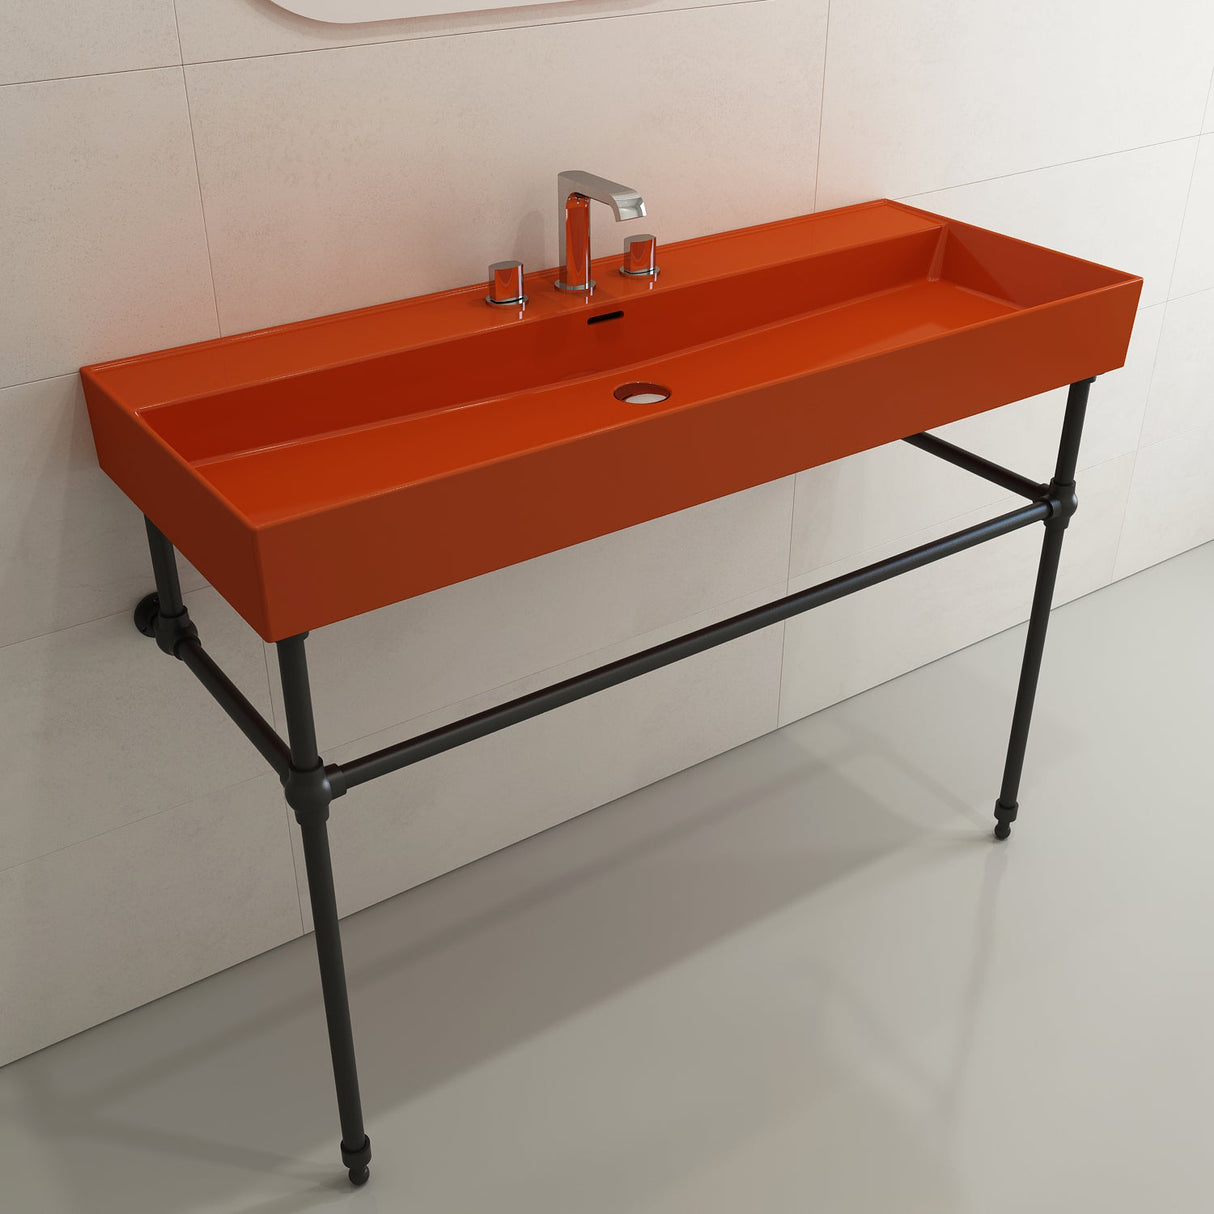 BOCCHI 1394-012-0127 Milano Wall-Mounted Sink Fireclay 47.75 in. 3-Hole with Overflow in Orange